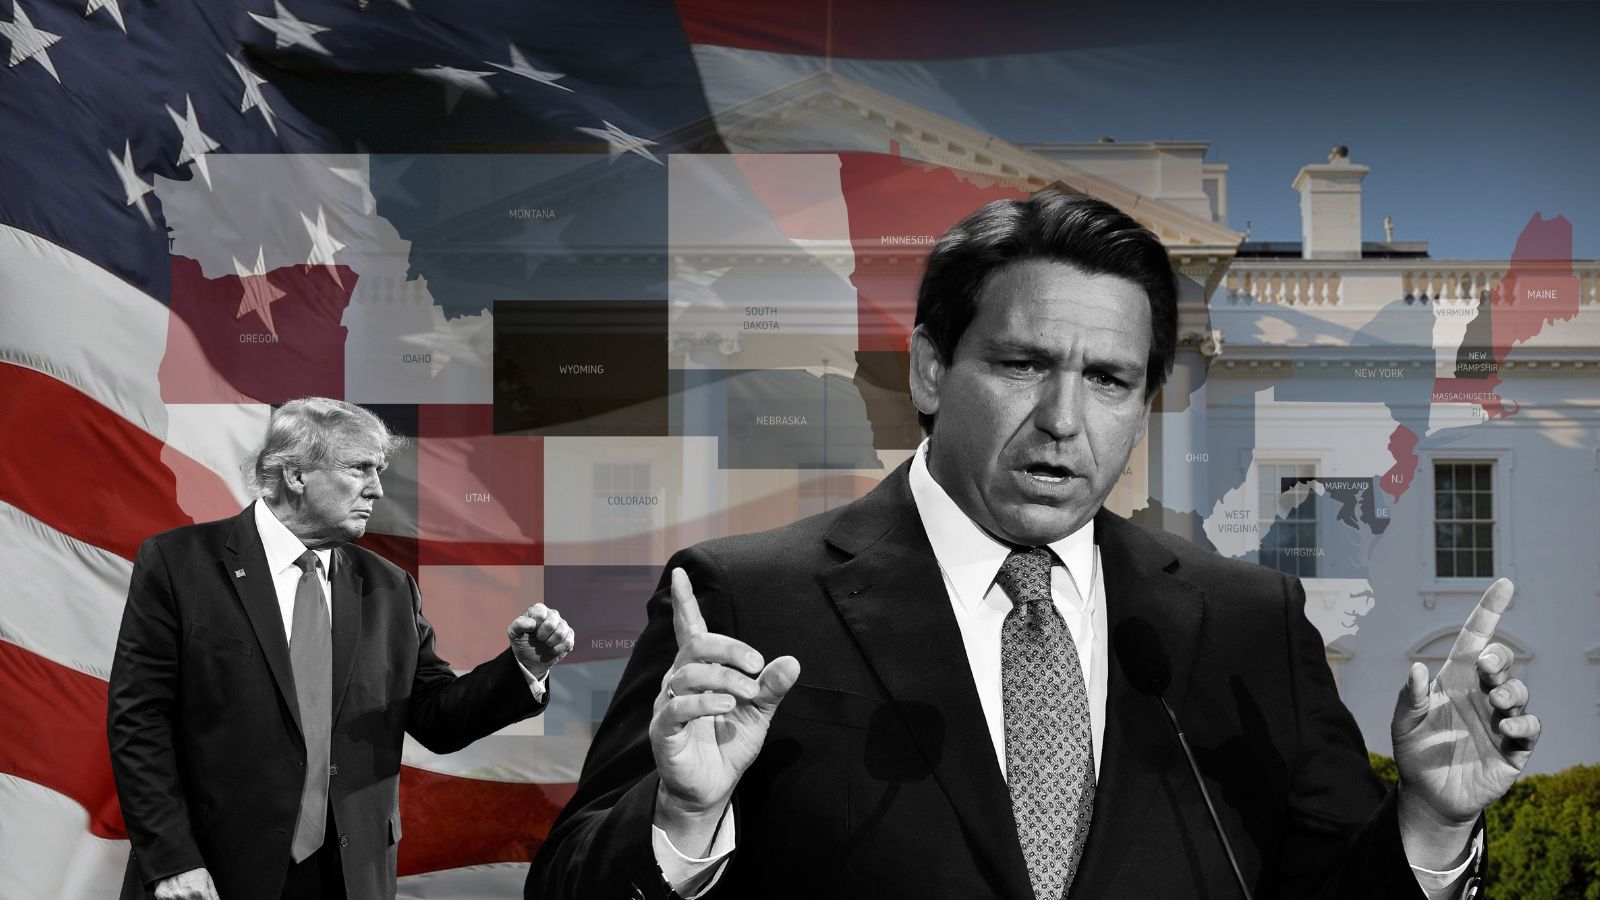 “Trump’s Lead in Iowa Is Fragile” – Evangelicals Struggle With Ex-Bush Official’s DeSantis Support